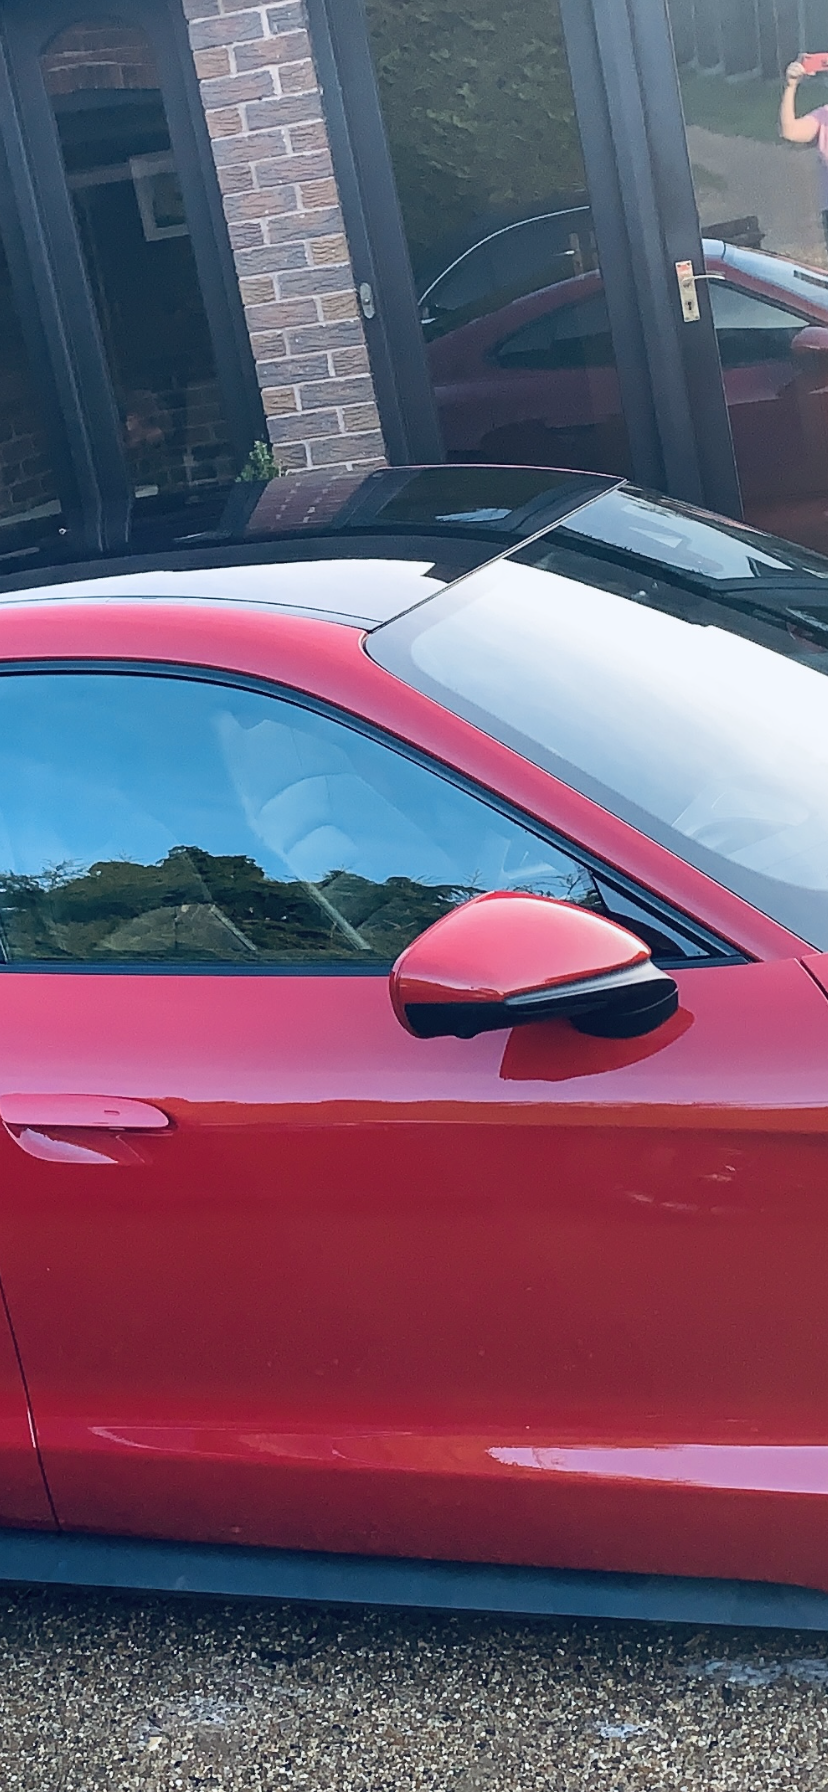 Porsche Taycan How does the standard window and mirror trim look? 1D807962-0778-40AC-943E-682C17584BB9